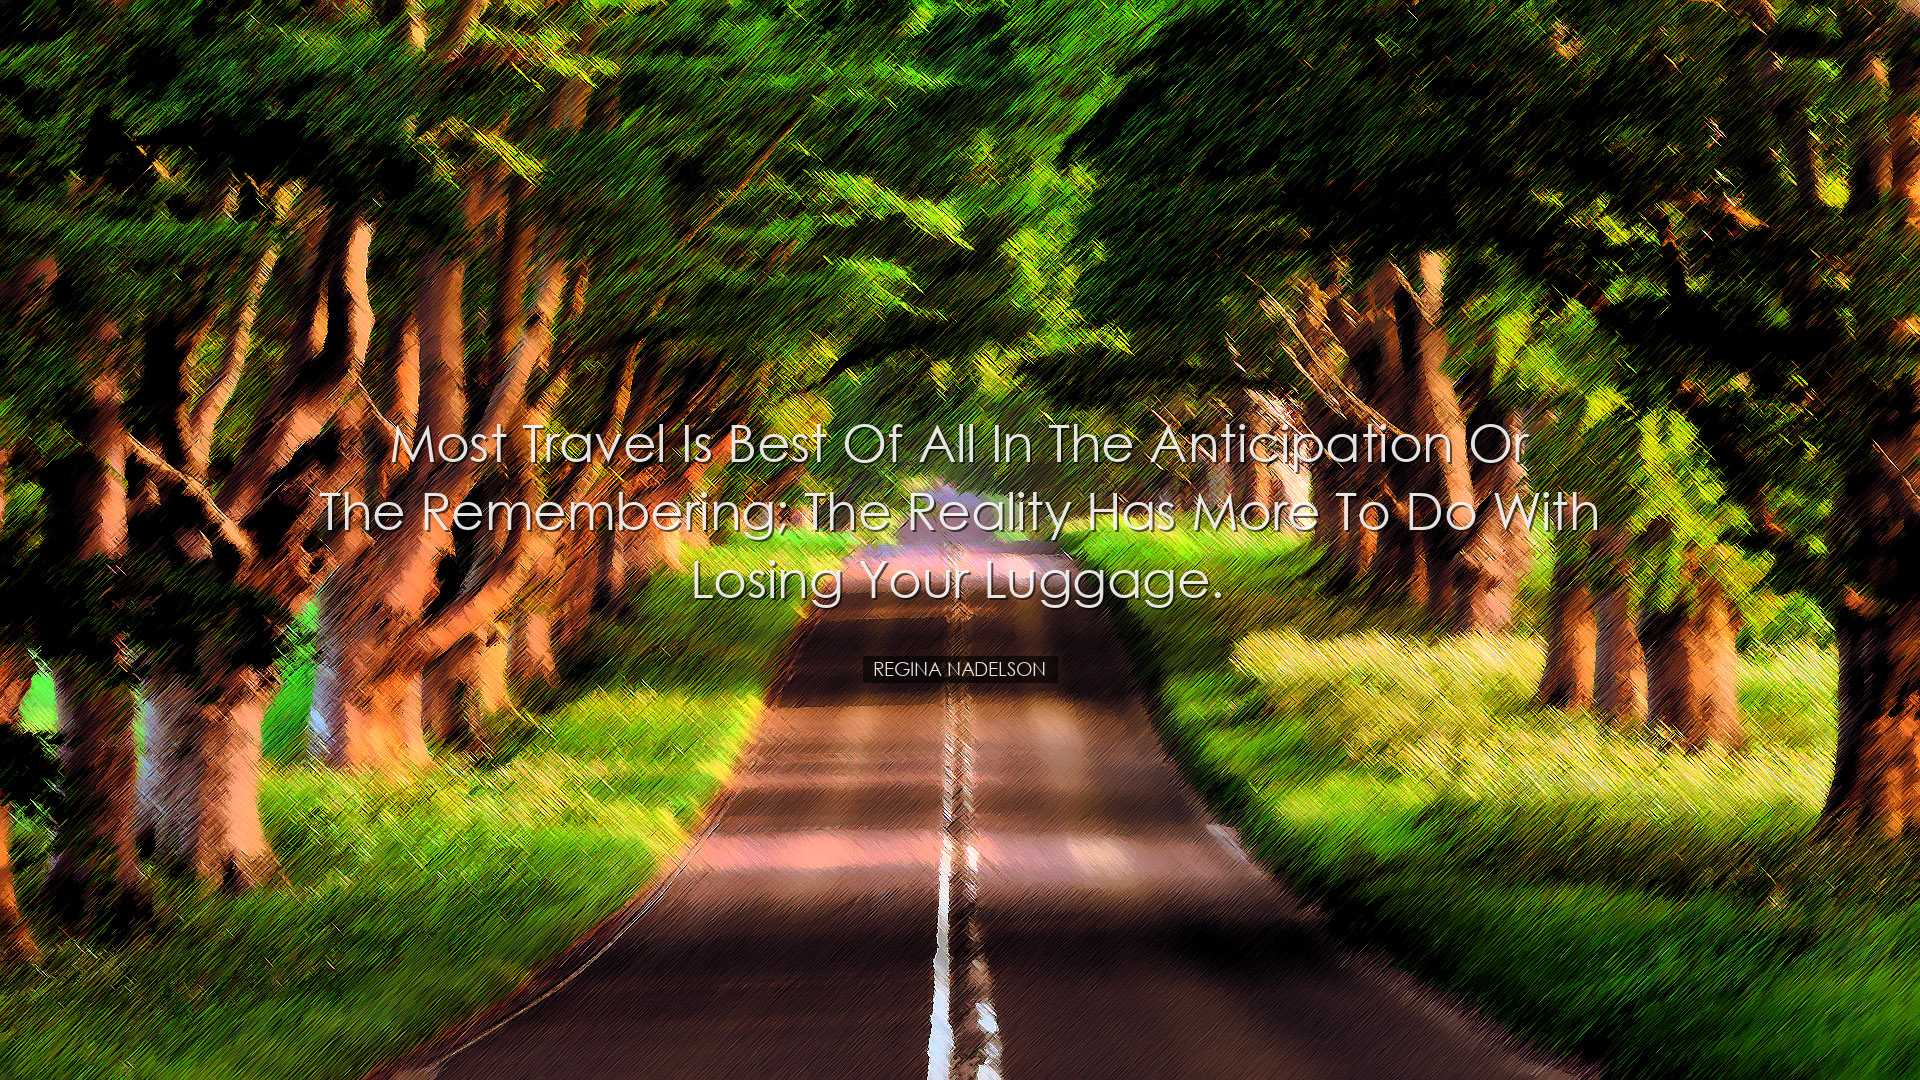 Most travel is best of all in the anticipation or the remembering;